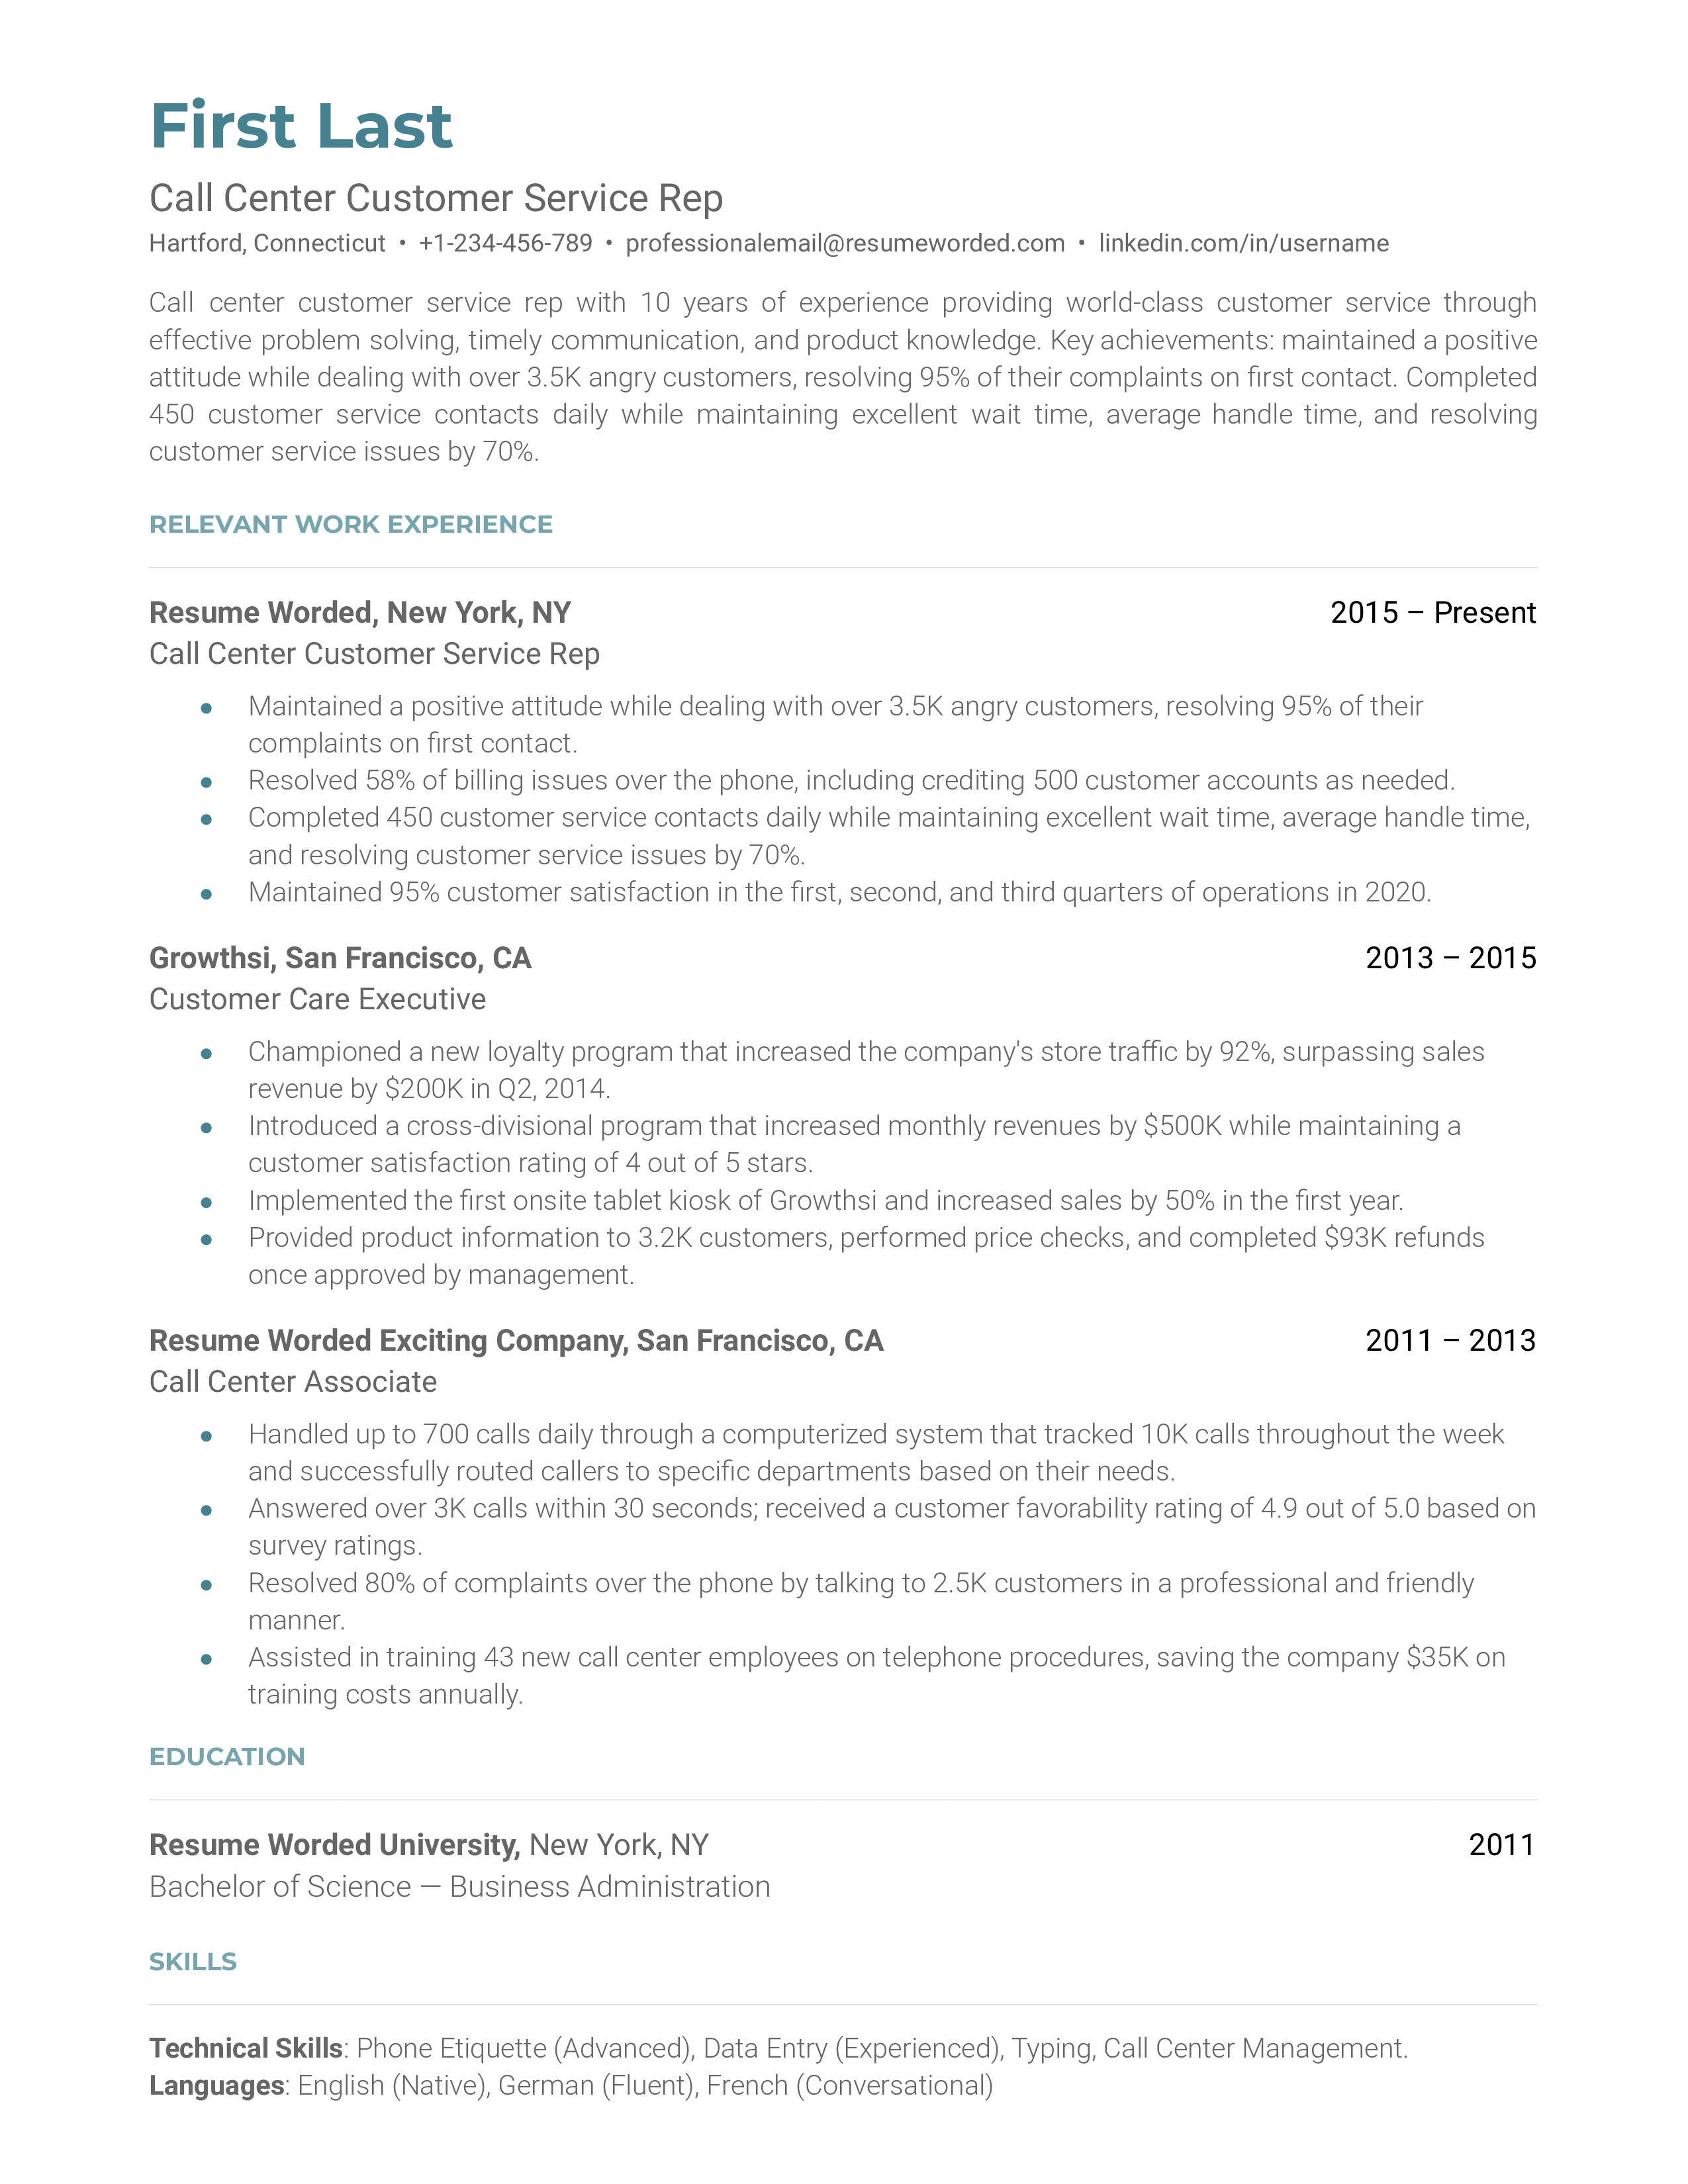 A well-structured CV showcasing relevant skills and achievements of a Call Center Customer Service Rep.